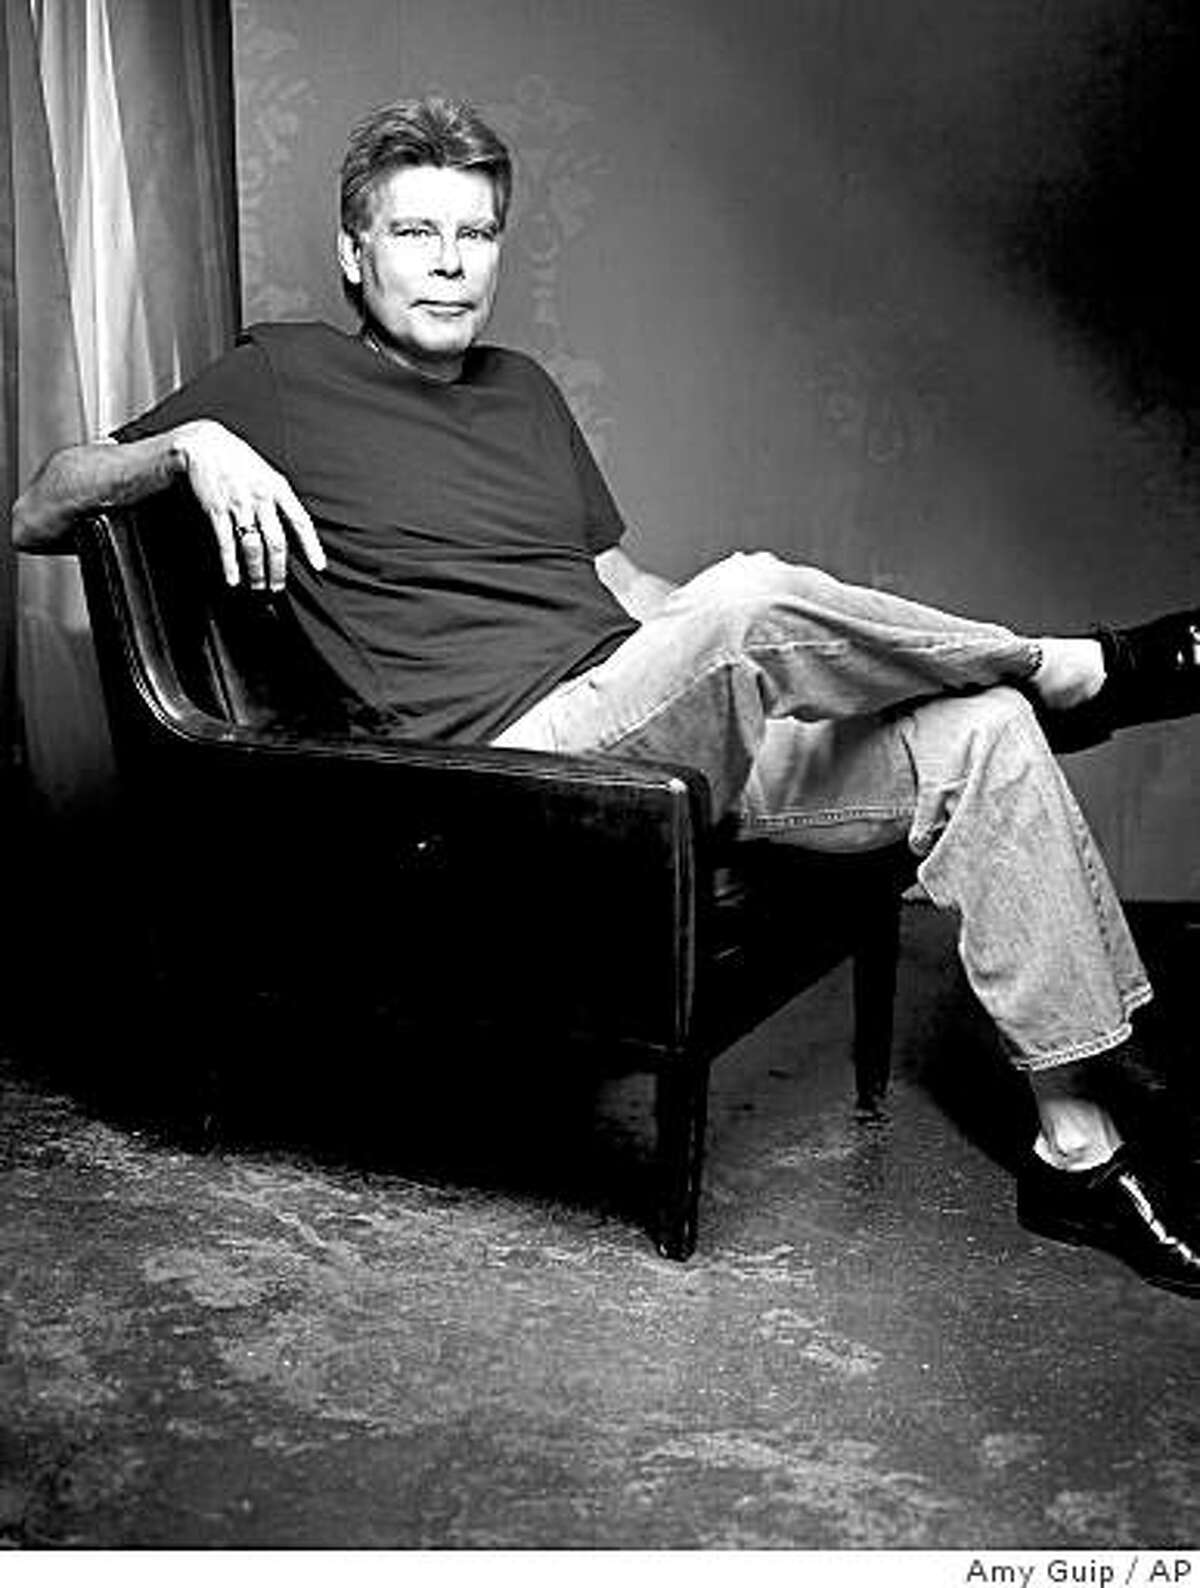 This photo released by Scribner shows Stephen King author of "Just After Sunset". (AP Photo/Amy Guip,Scribner)**NO SALES**